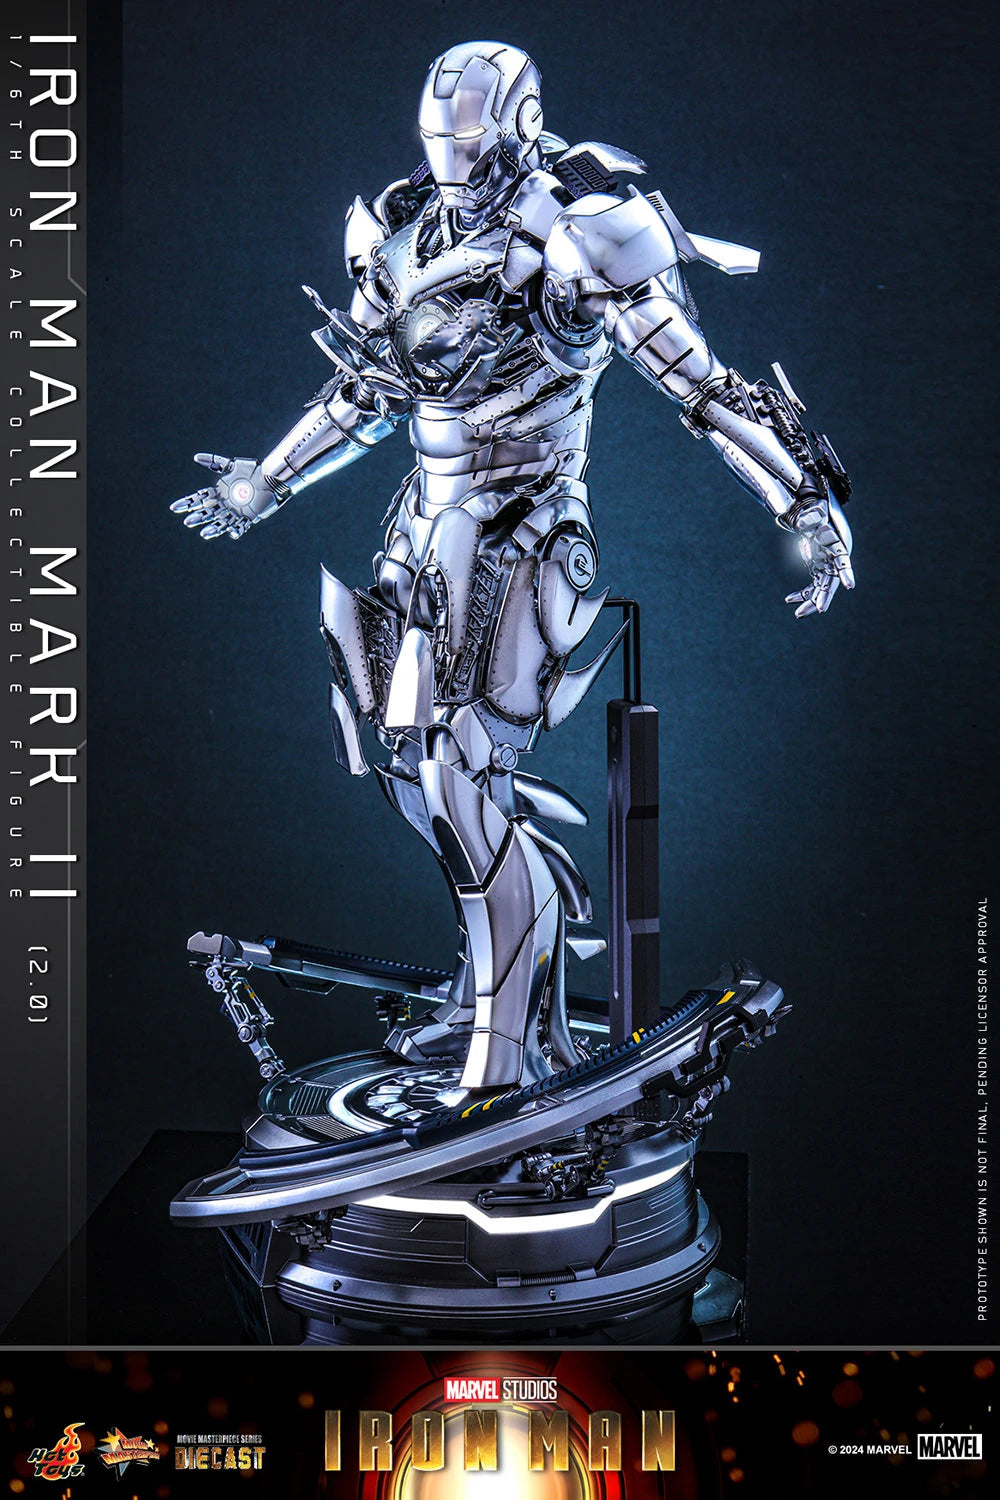 IRON MAN MARK II (2.0) Sixth Scale Figure by Hot Toys